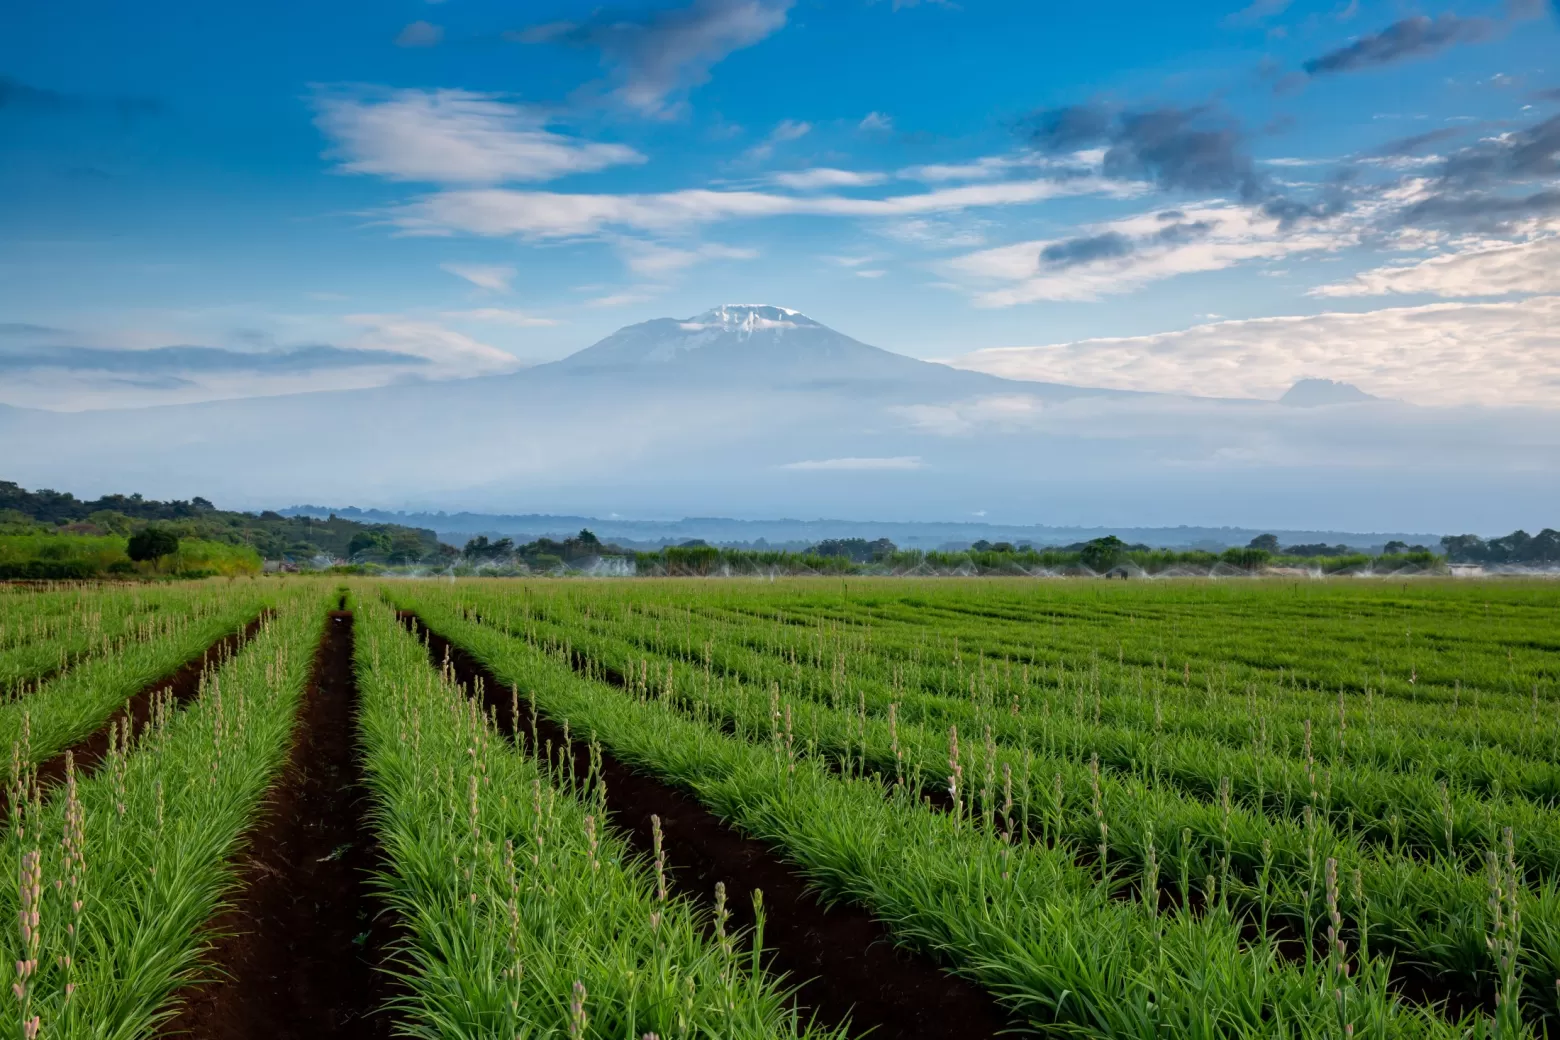 Polianthes flower field in Tanzania with Kilimanjaro in the background